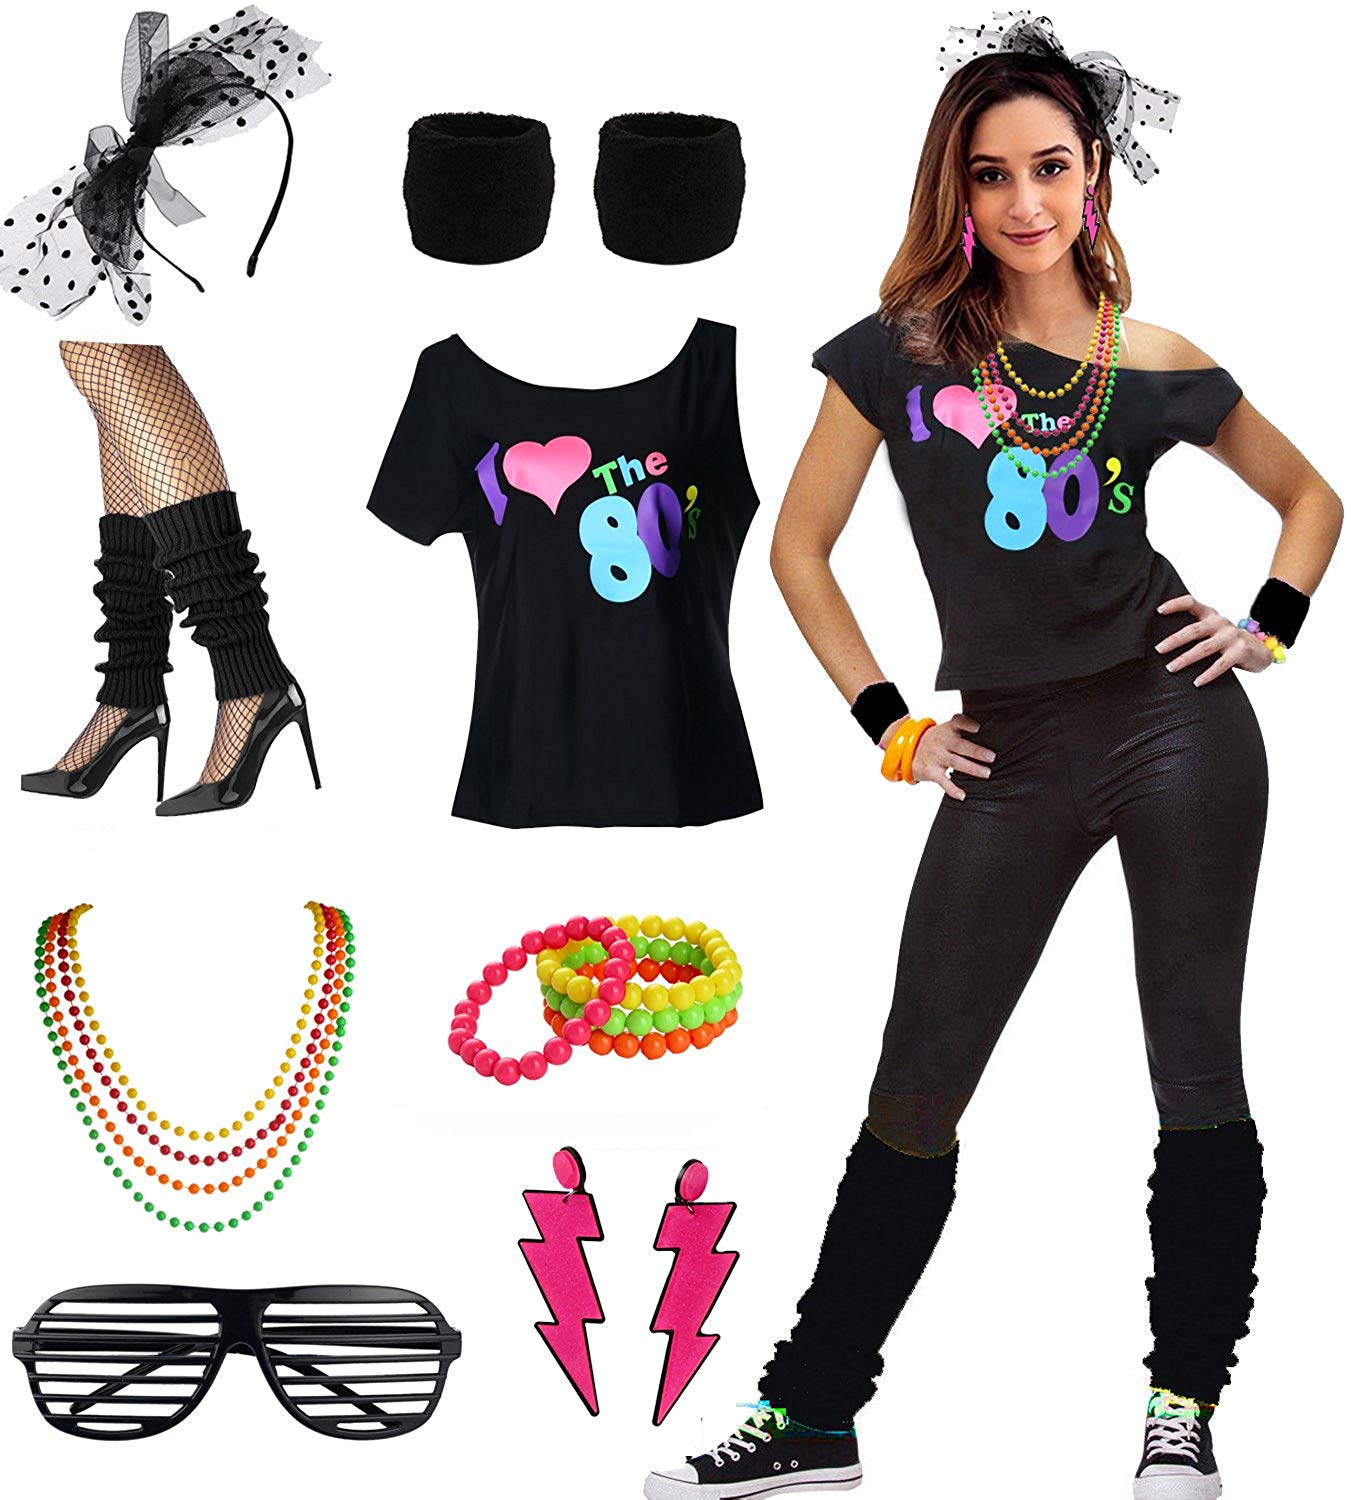 80s Fashion and Apparel Logo - Amazon.com: Womens I Love The 80's Disco 80s Costume Outfit ...